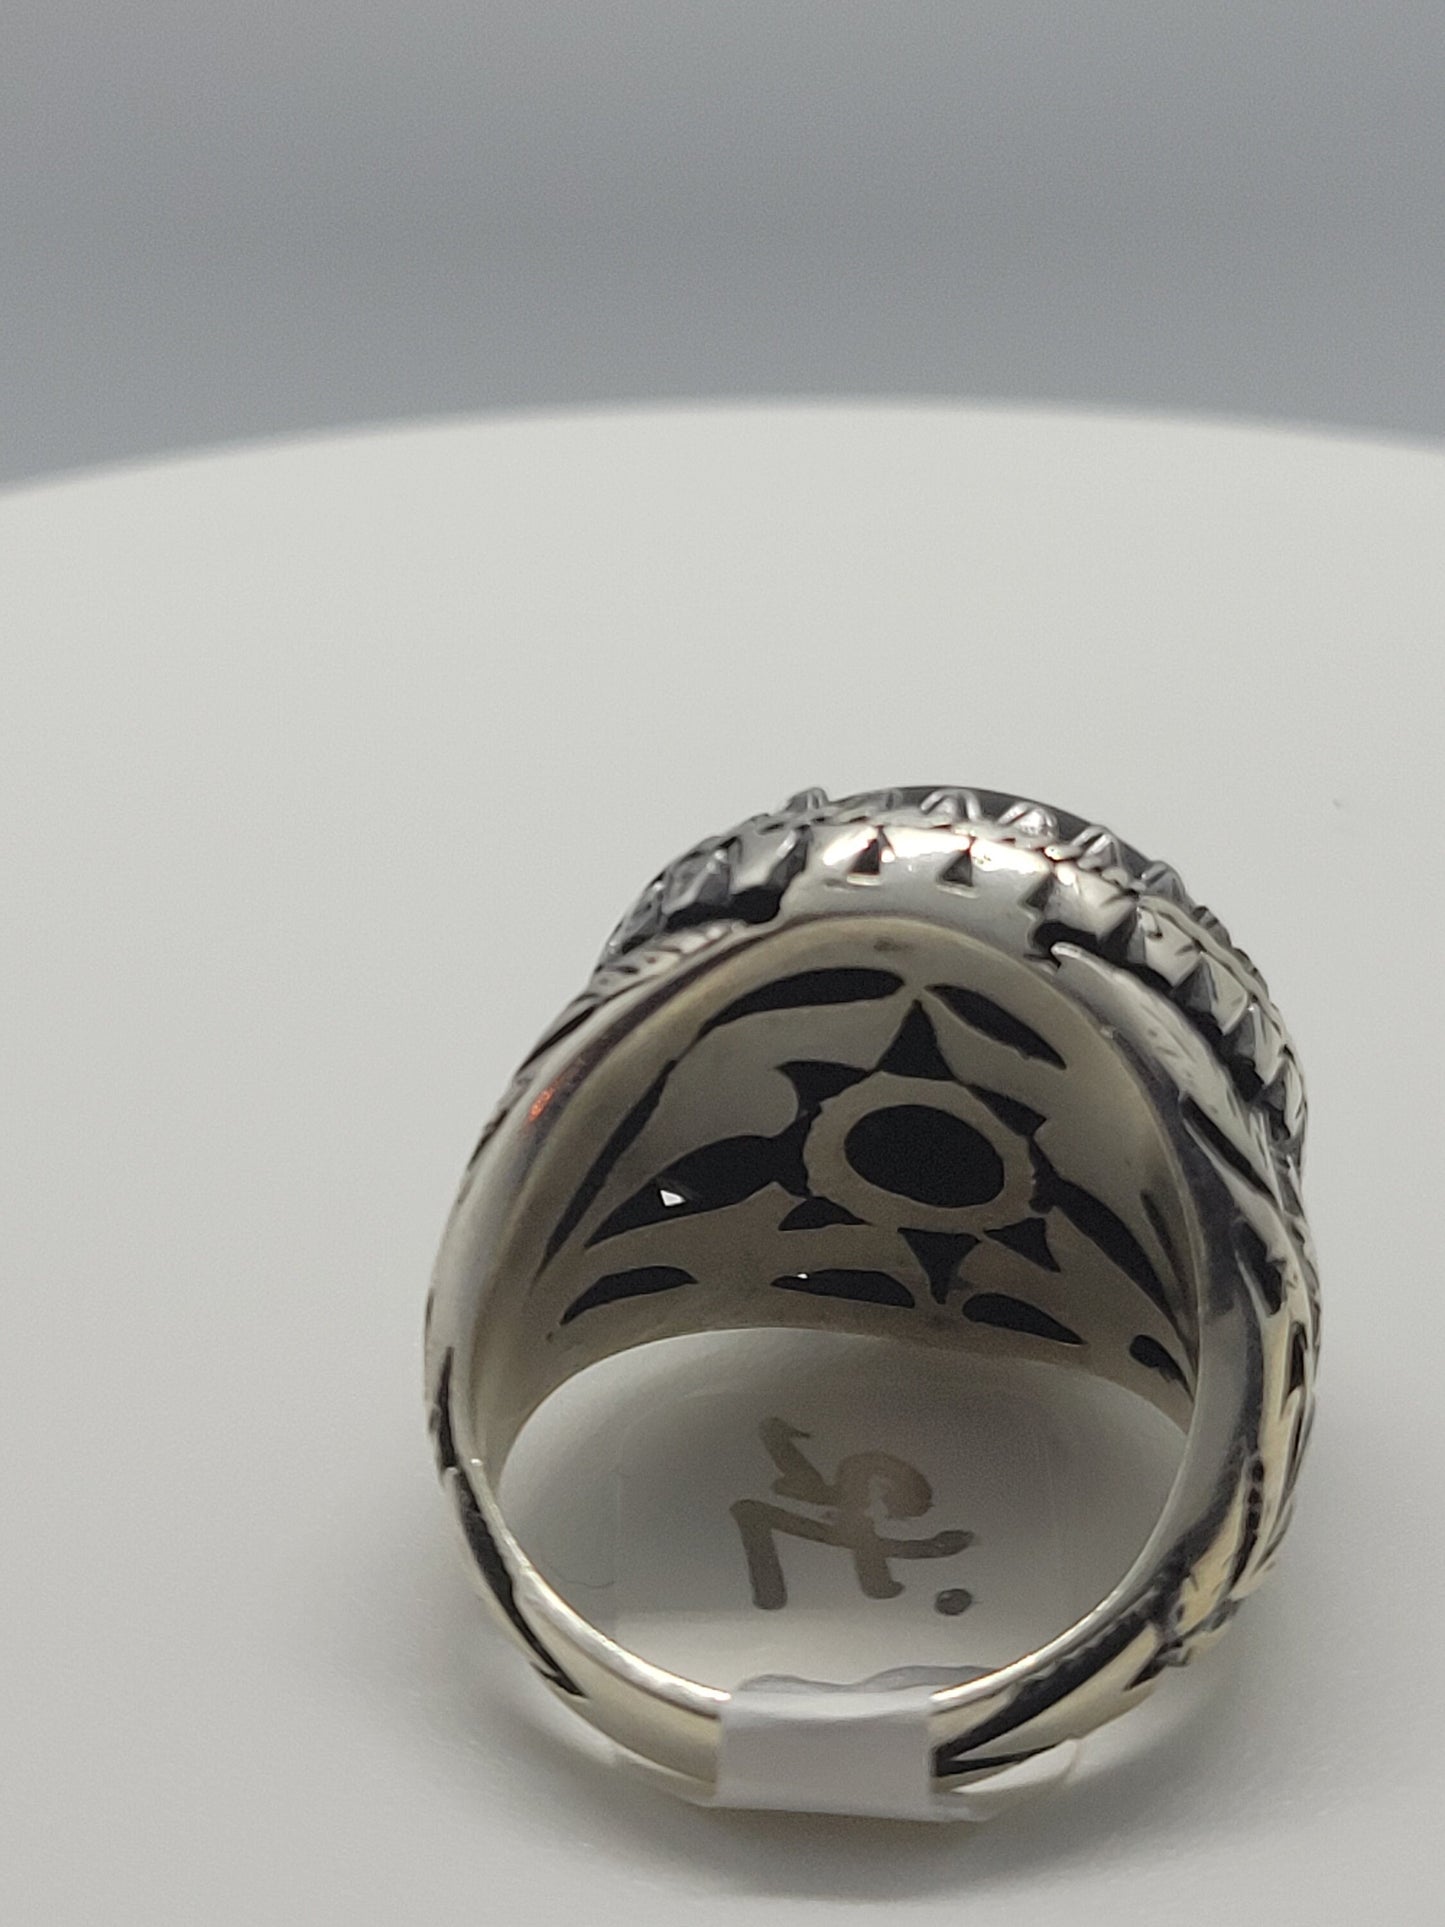 Vintage Black Onyx Mens Ring in 925 Sterling Silver Persian Styled with Genuine Onyx